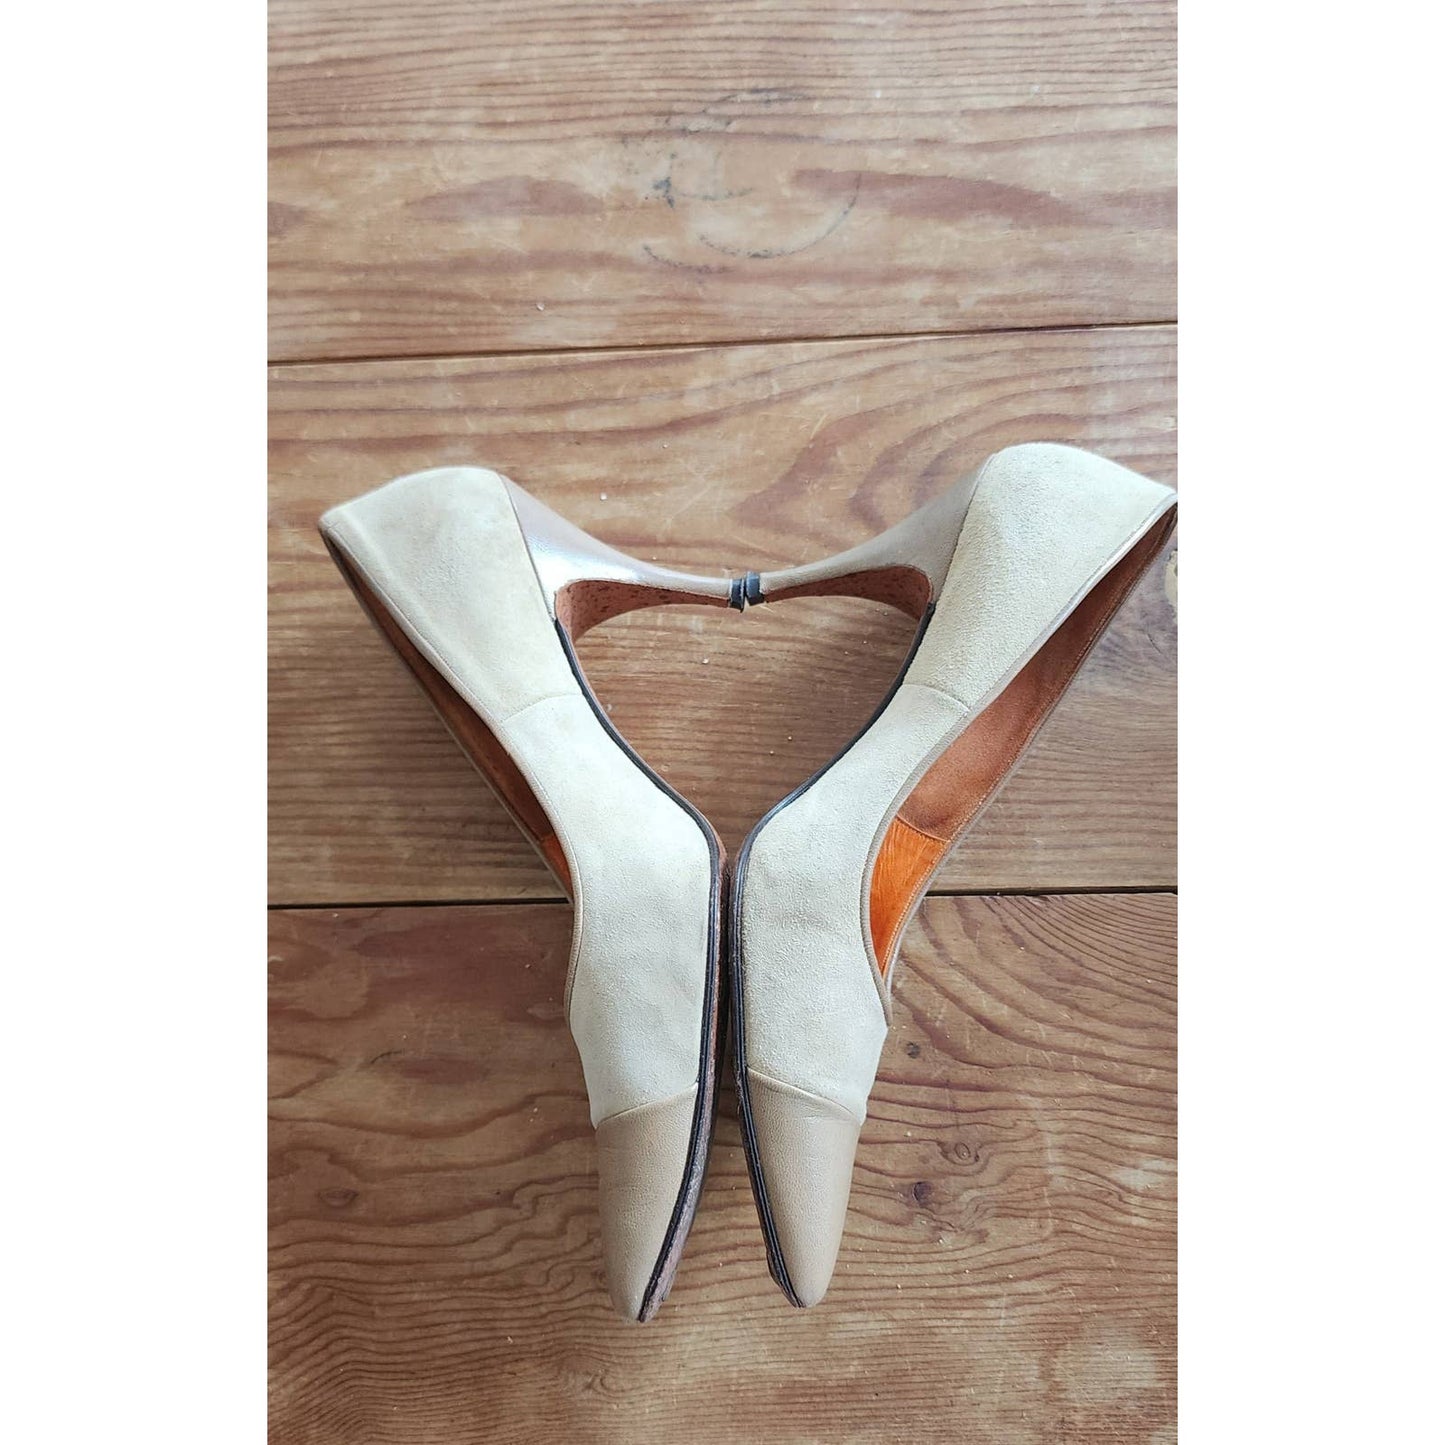 Vintage 50s Beige Shoes High Heels Pointy Toe Andrew Geller Two Toned 8.5